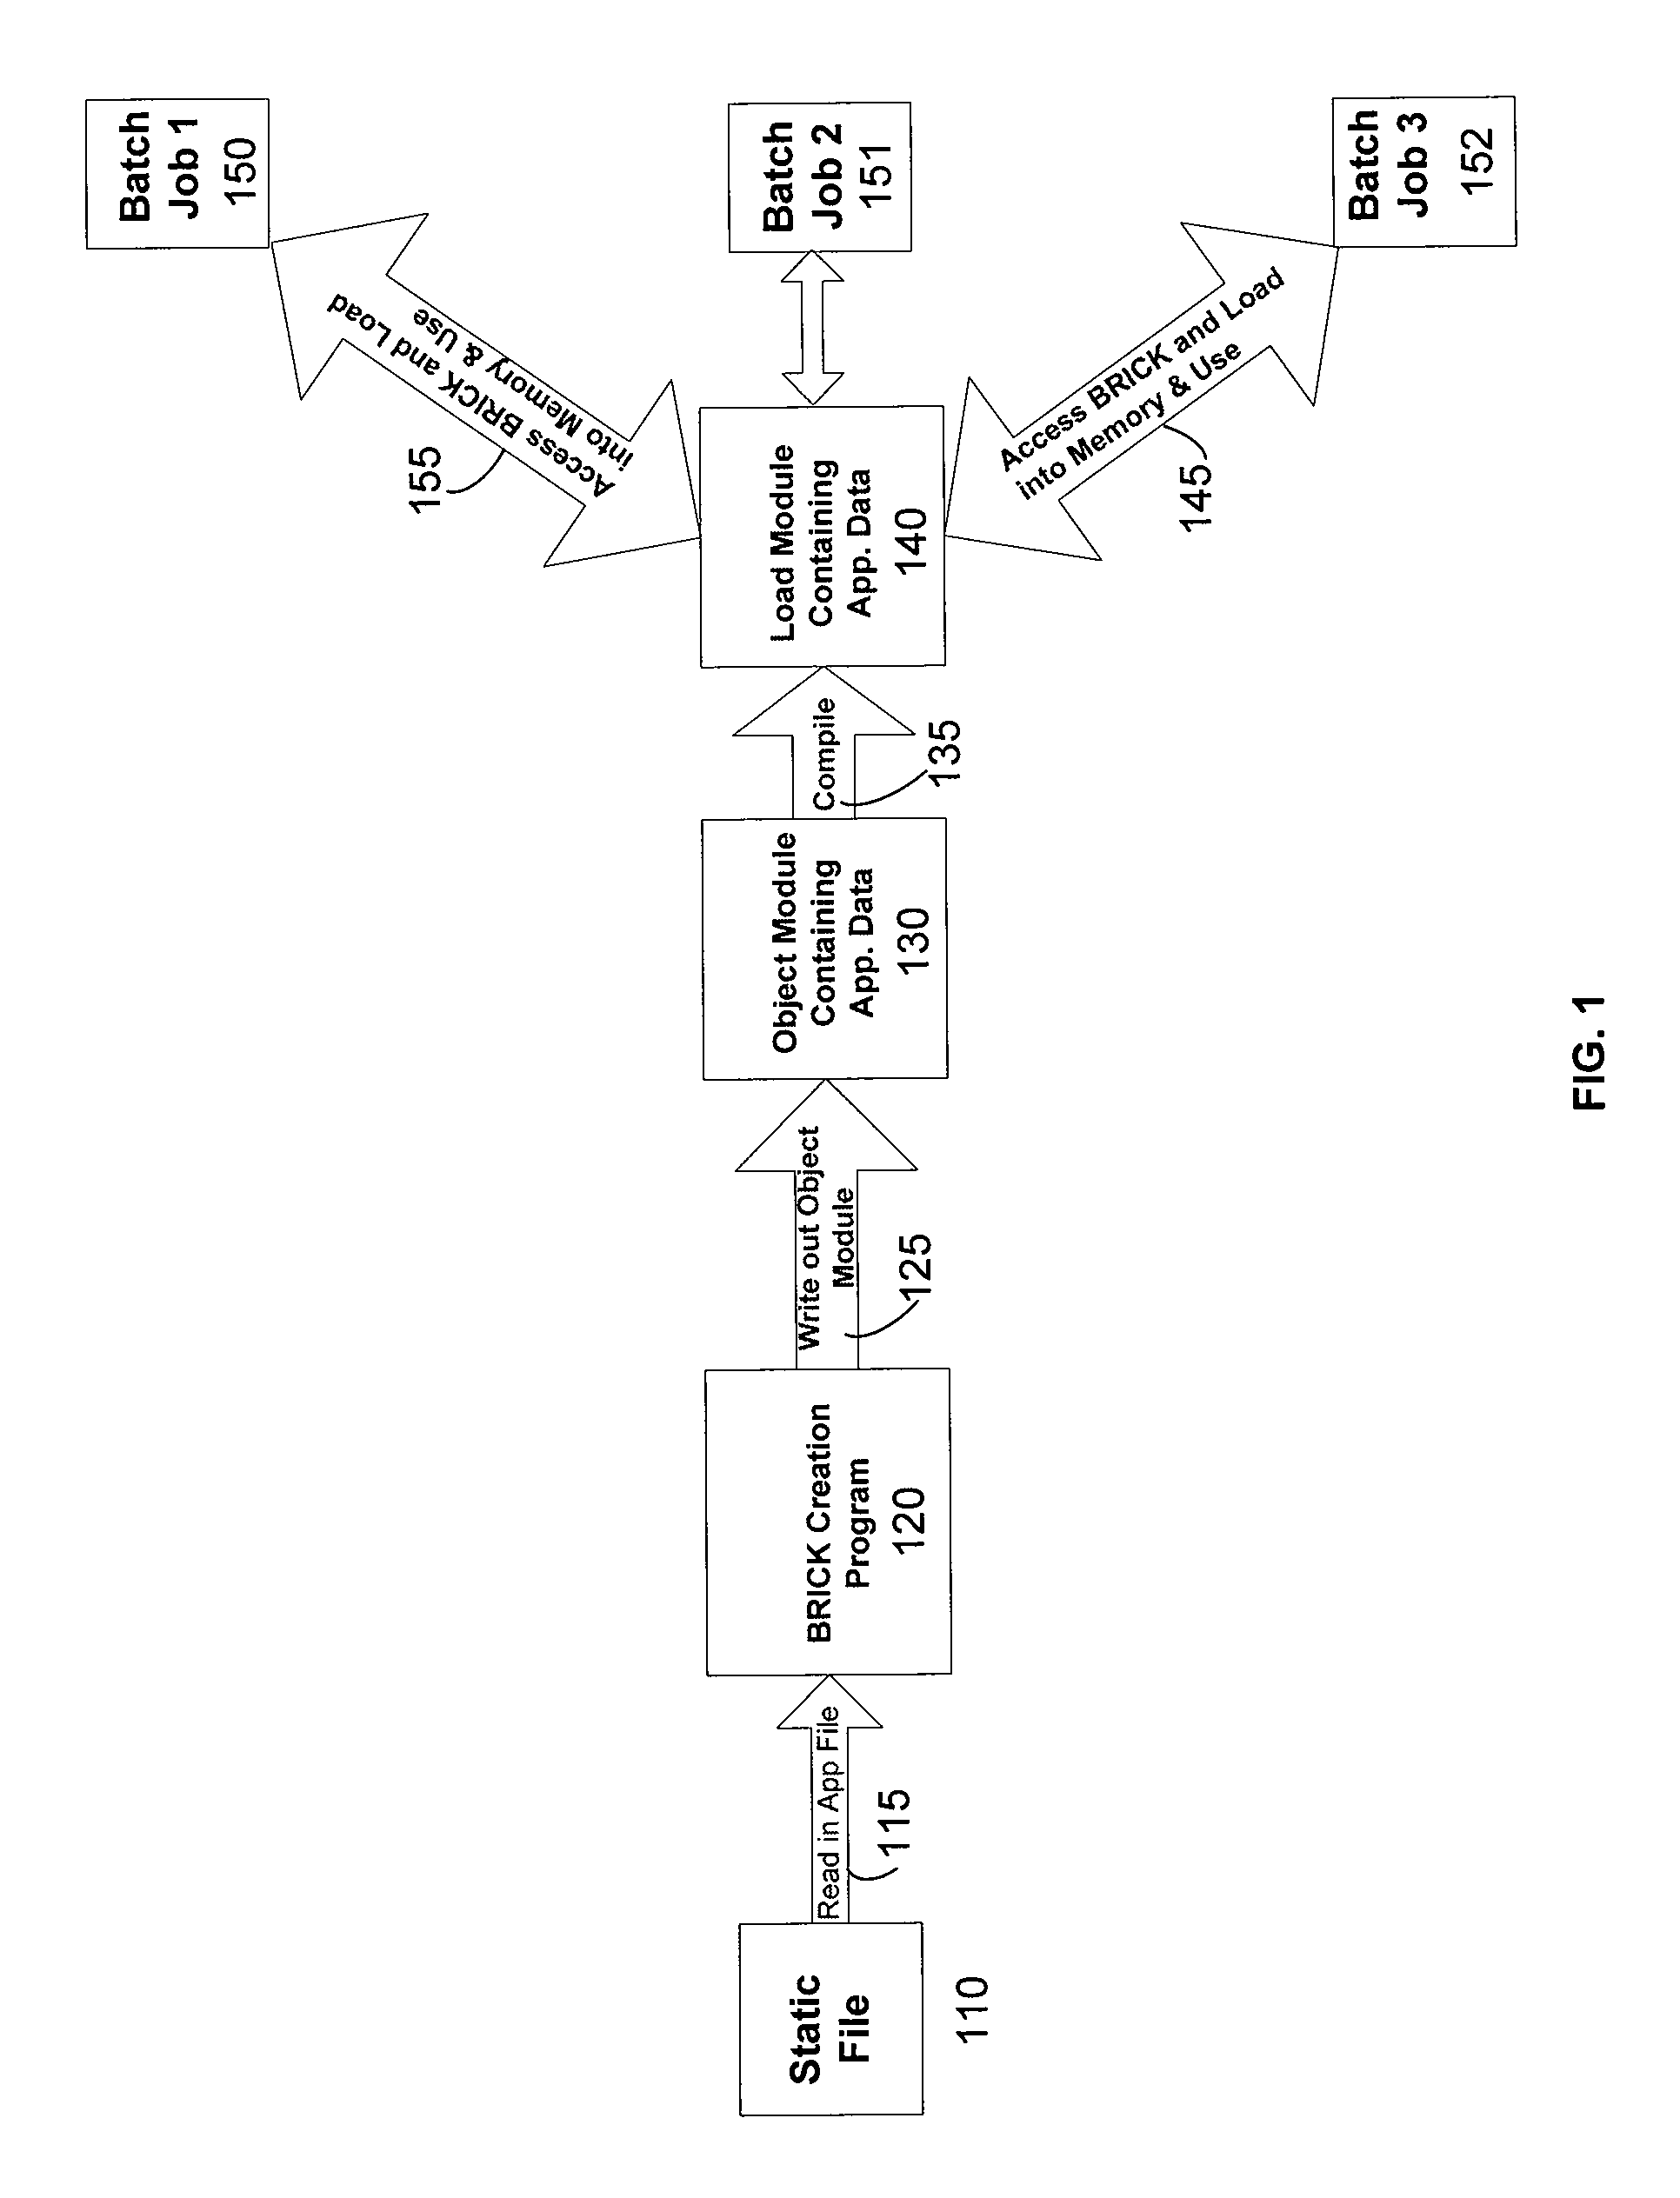 Systems and methods for data brick creation and use